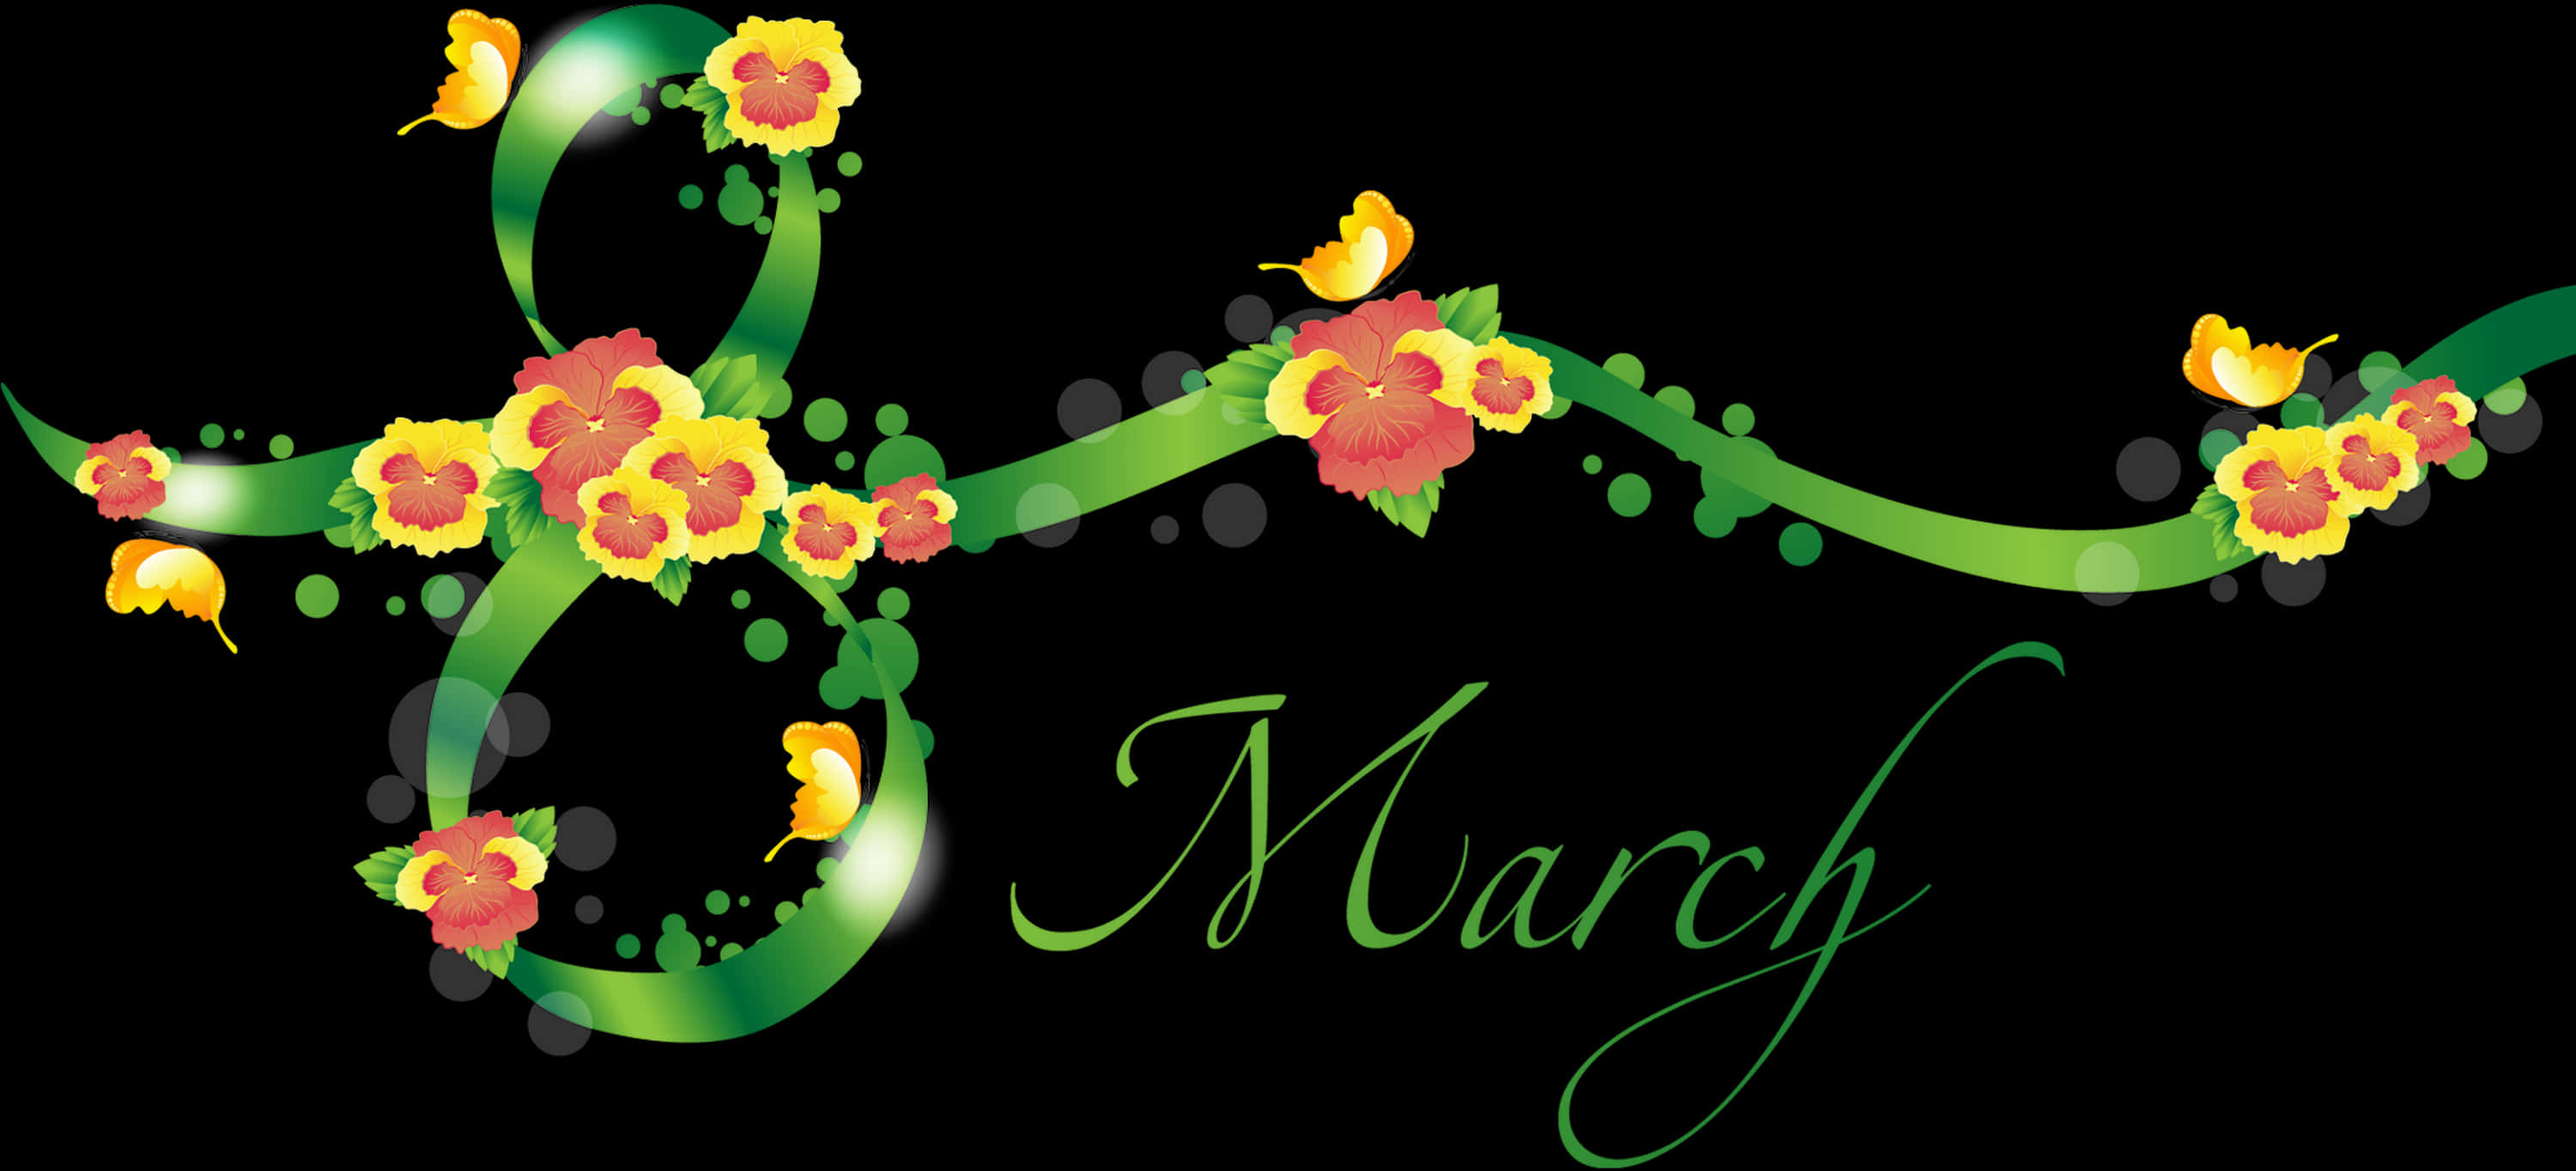 International Womens Day March8 Floral Graphic